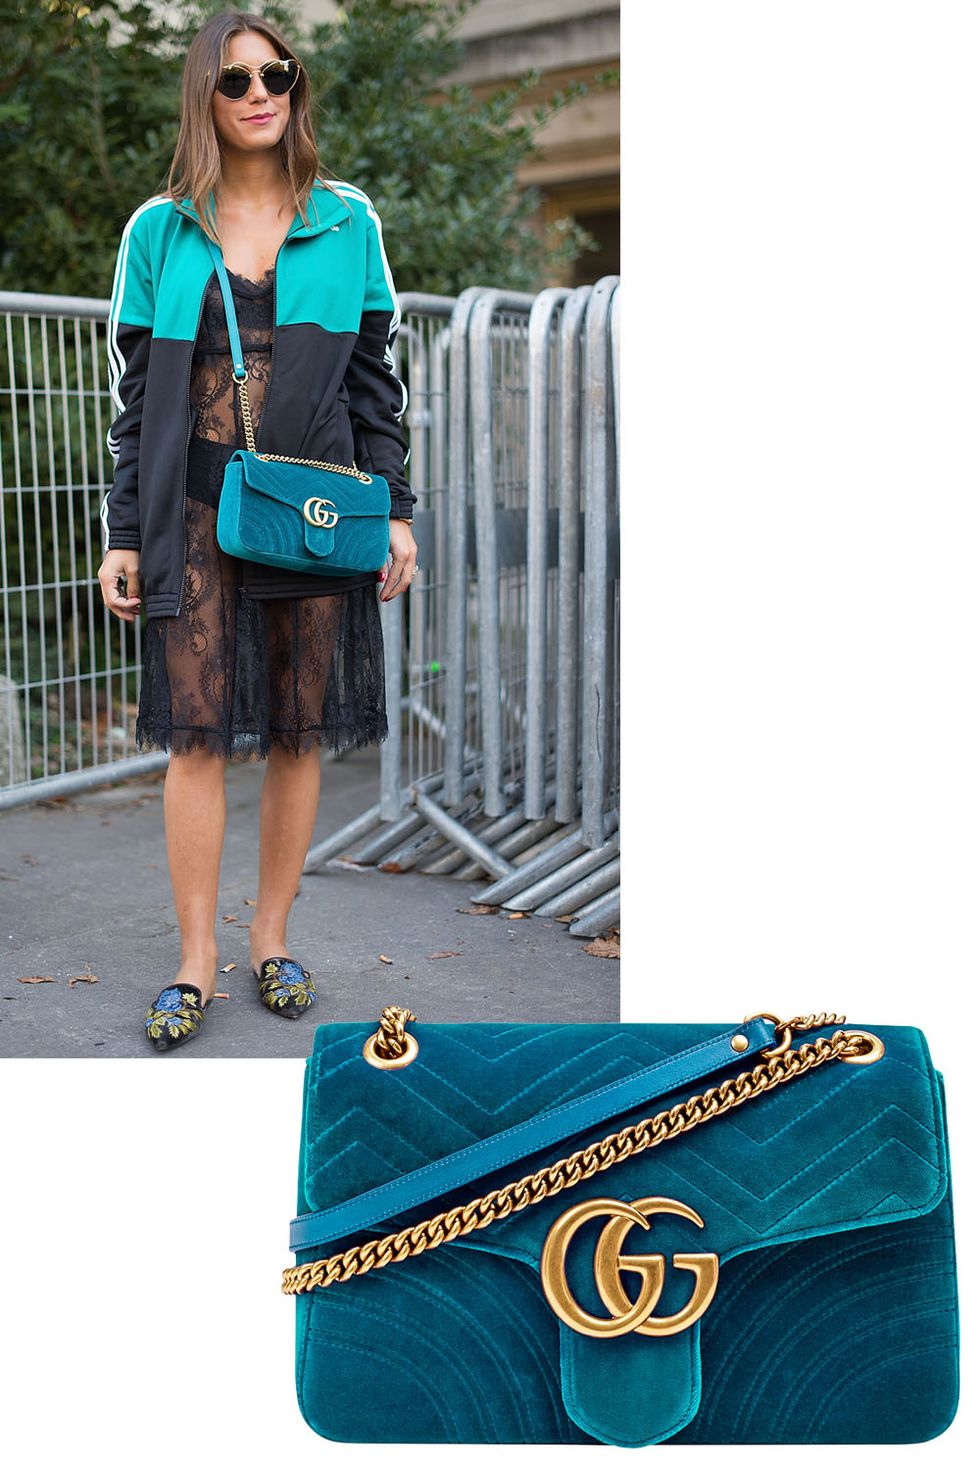 <p>Did we mention that velvet is&nbsp;<em data-redactor-tag="em" data-verified="redactor">big news</em><span class="redactor-invisible-space">? A cross-body handbag was a subtle way to dip into the trend.&nbsp;</span></p><p><span class="redactor-invisible-space"><em data-redactor-tag="em" data-verified="redactor">Gucci bag, $1,290 (pre-order), <strong data-redactor-tag="strong" data-verified="redactor"><a href="https://shop.harpersbazaar.com/designers/g/gucci/turquoise-velvet-bag-9634.html" target="_blank">shopBAZAAR.com</a></strong>.</em>&nbsp;</span></p>